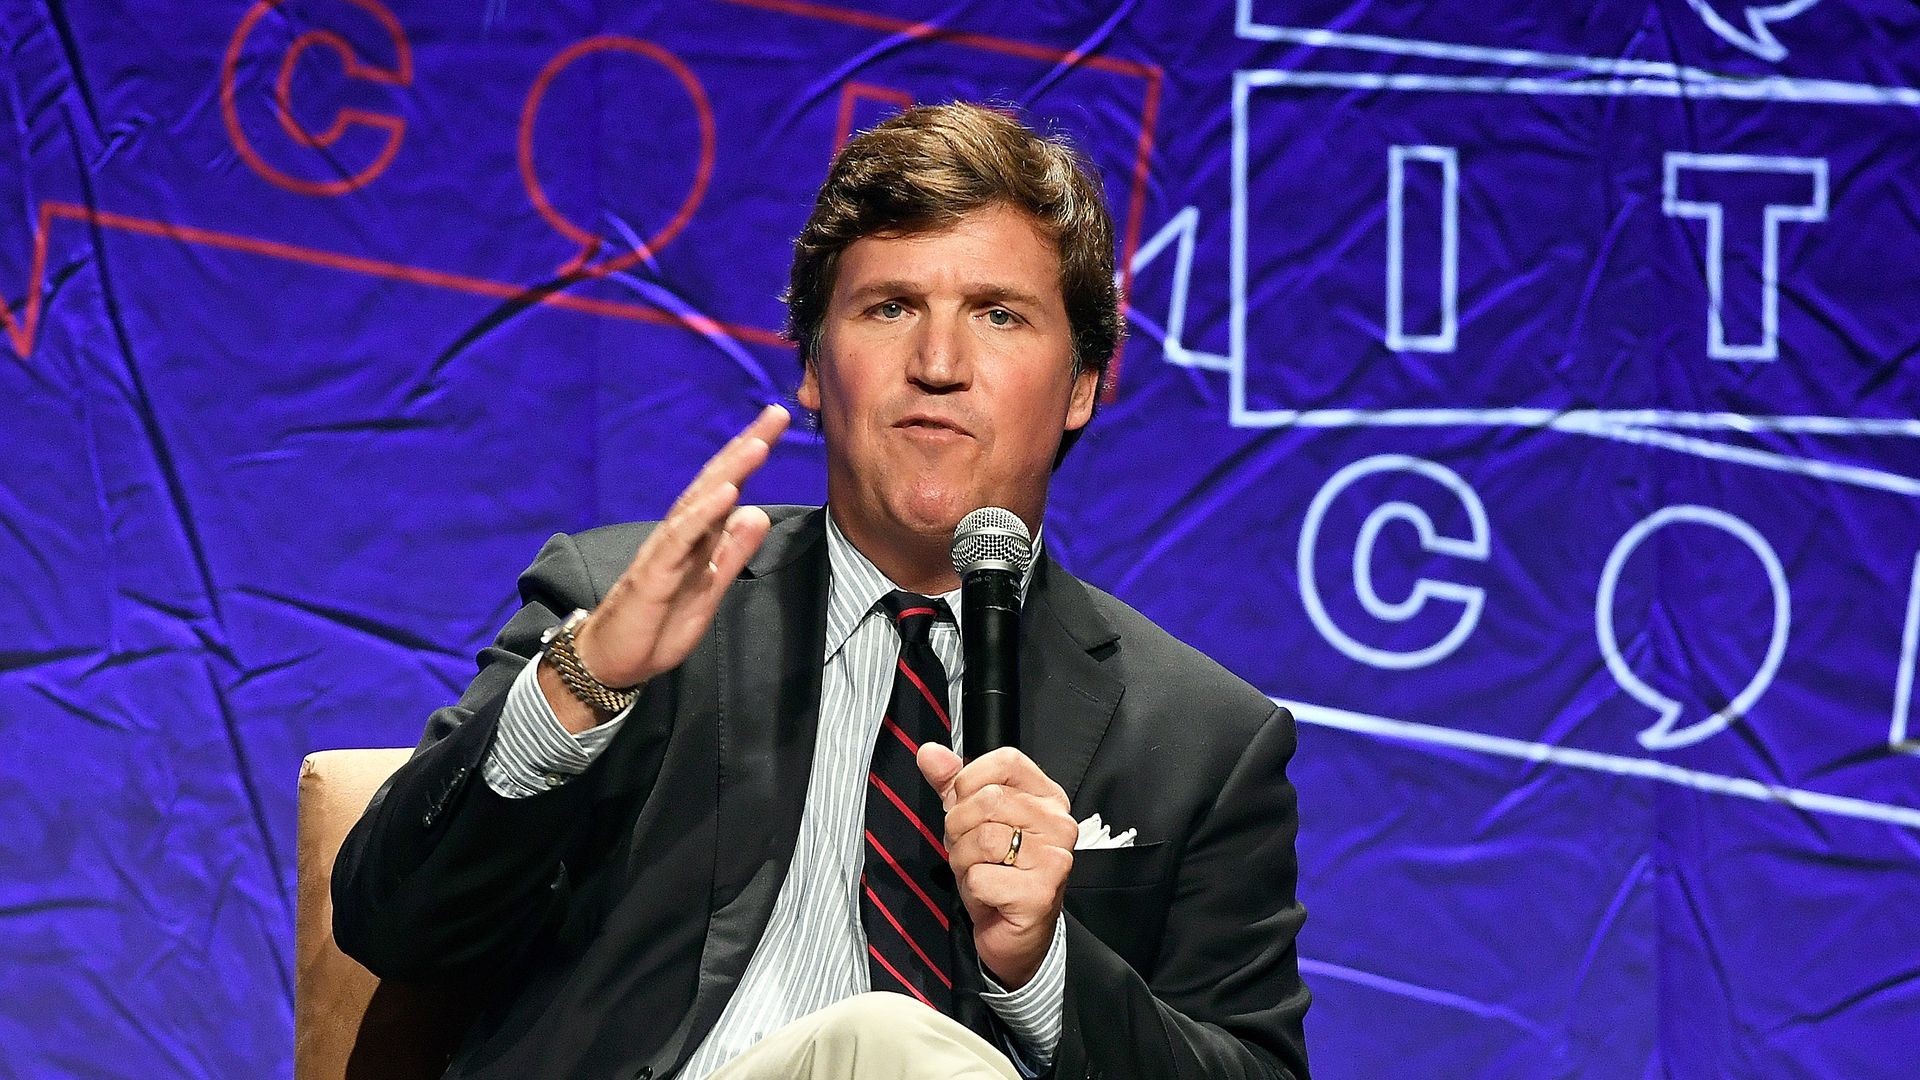 Tucker Carlson hasn't apologized for his past remarks on women.